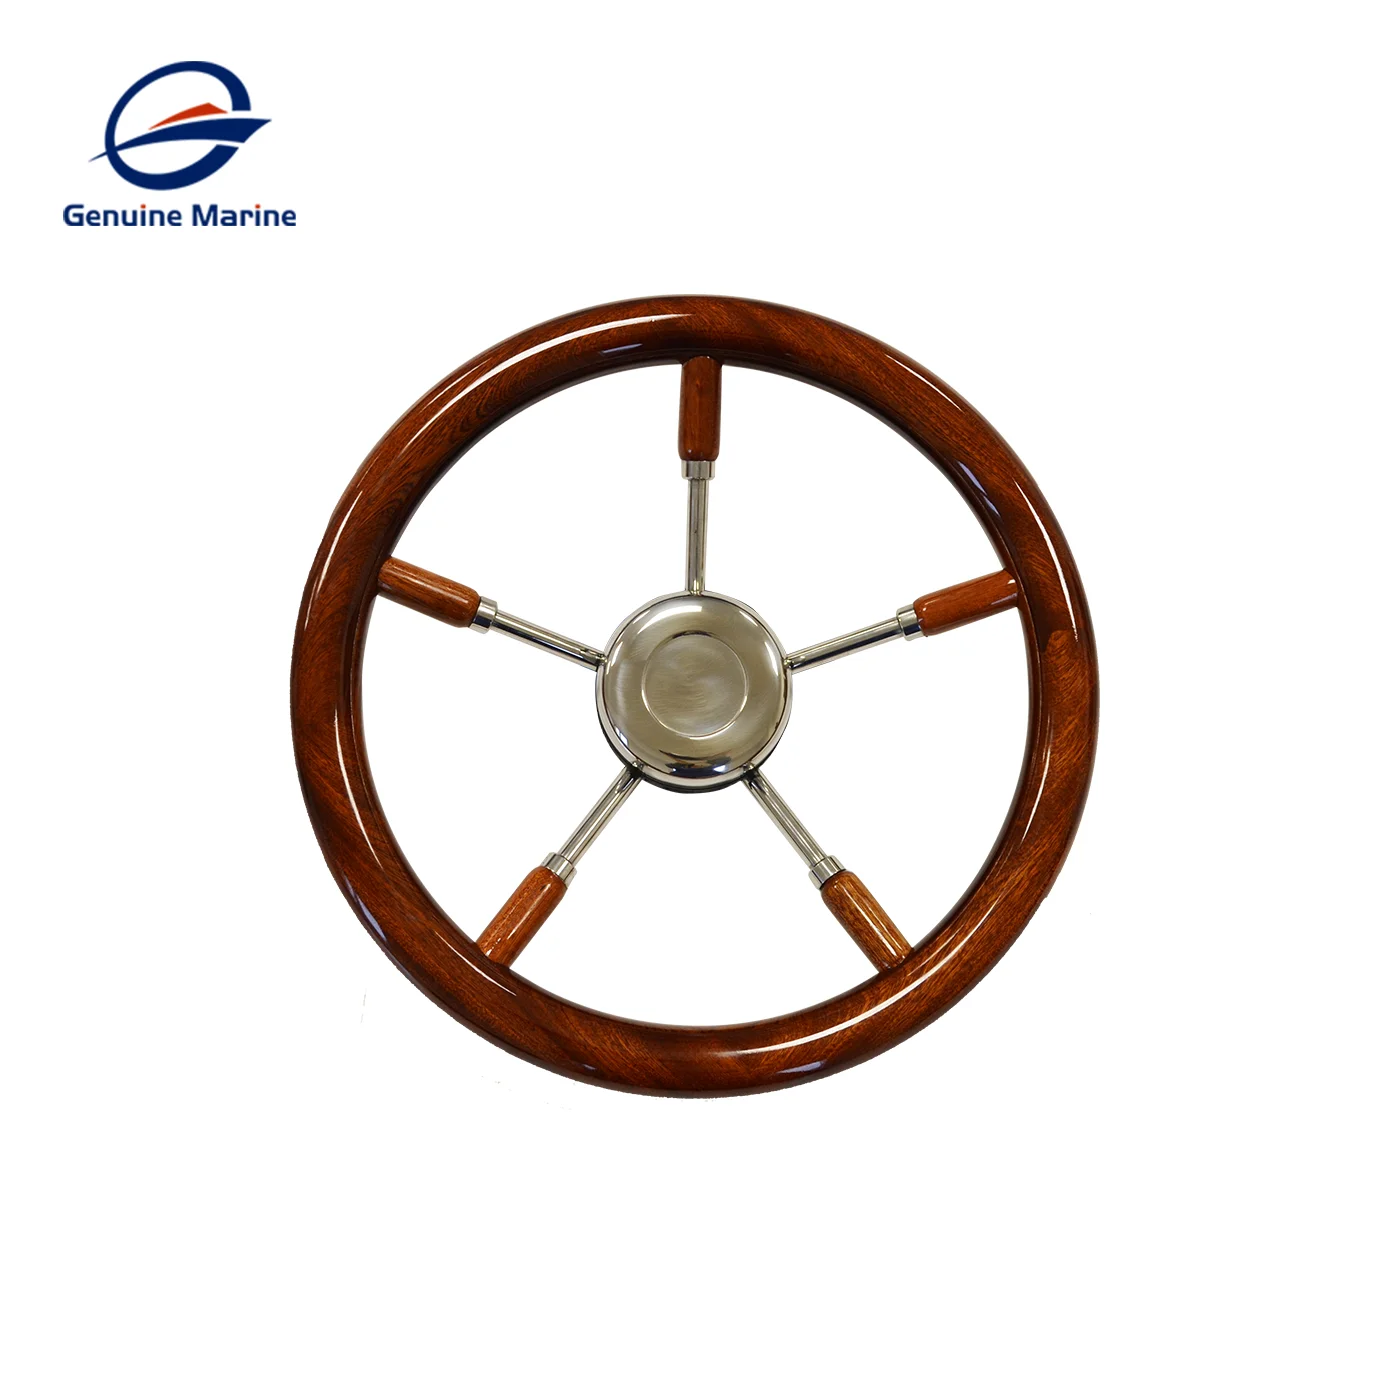 13.8Inch 350mm Steering Wheel Marine Non-directional Teak Wood With Stainless Steel For Most Boat Yacht With 3/4'' Tapered Shaft